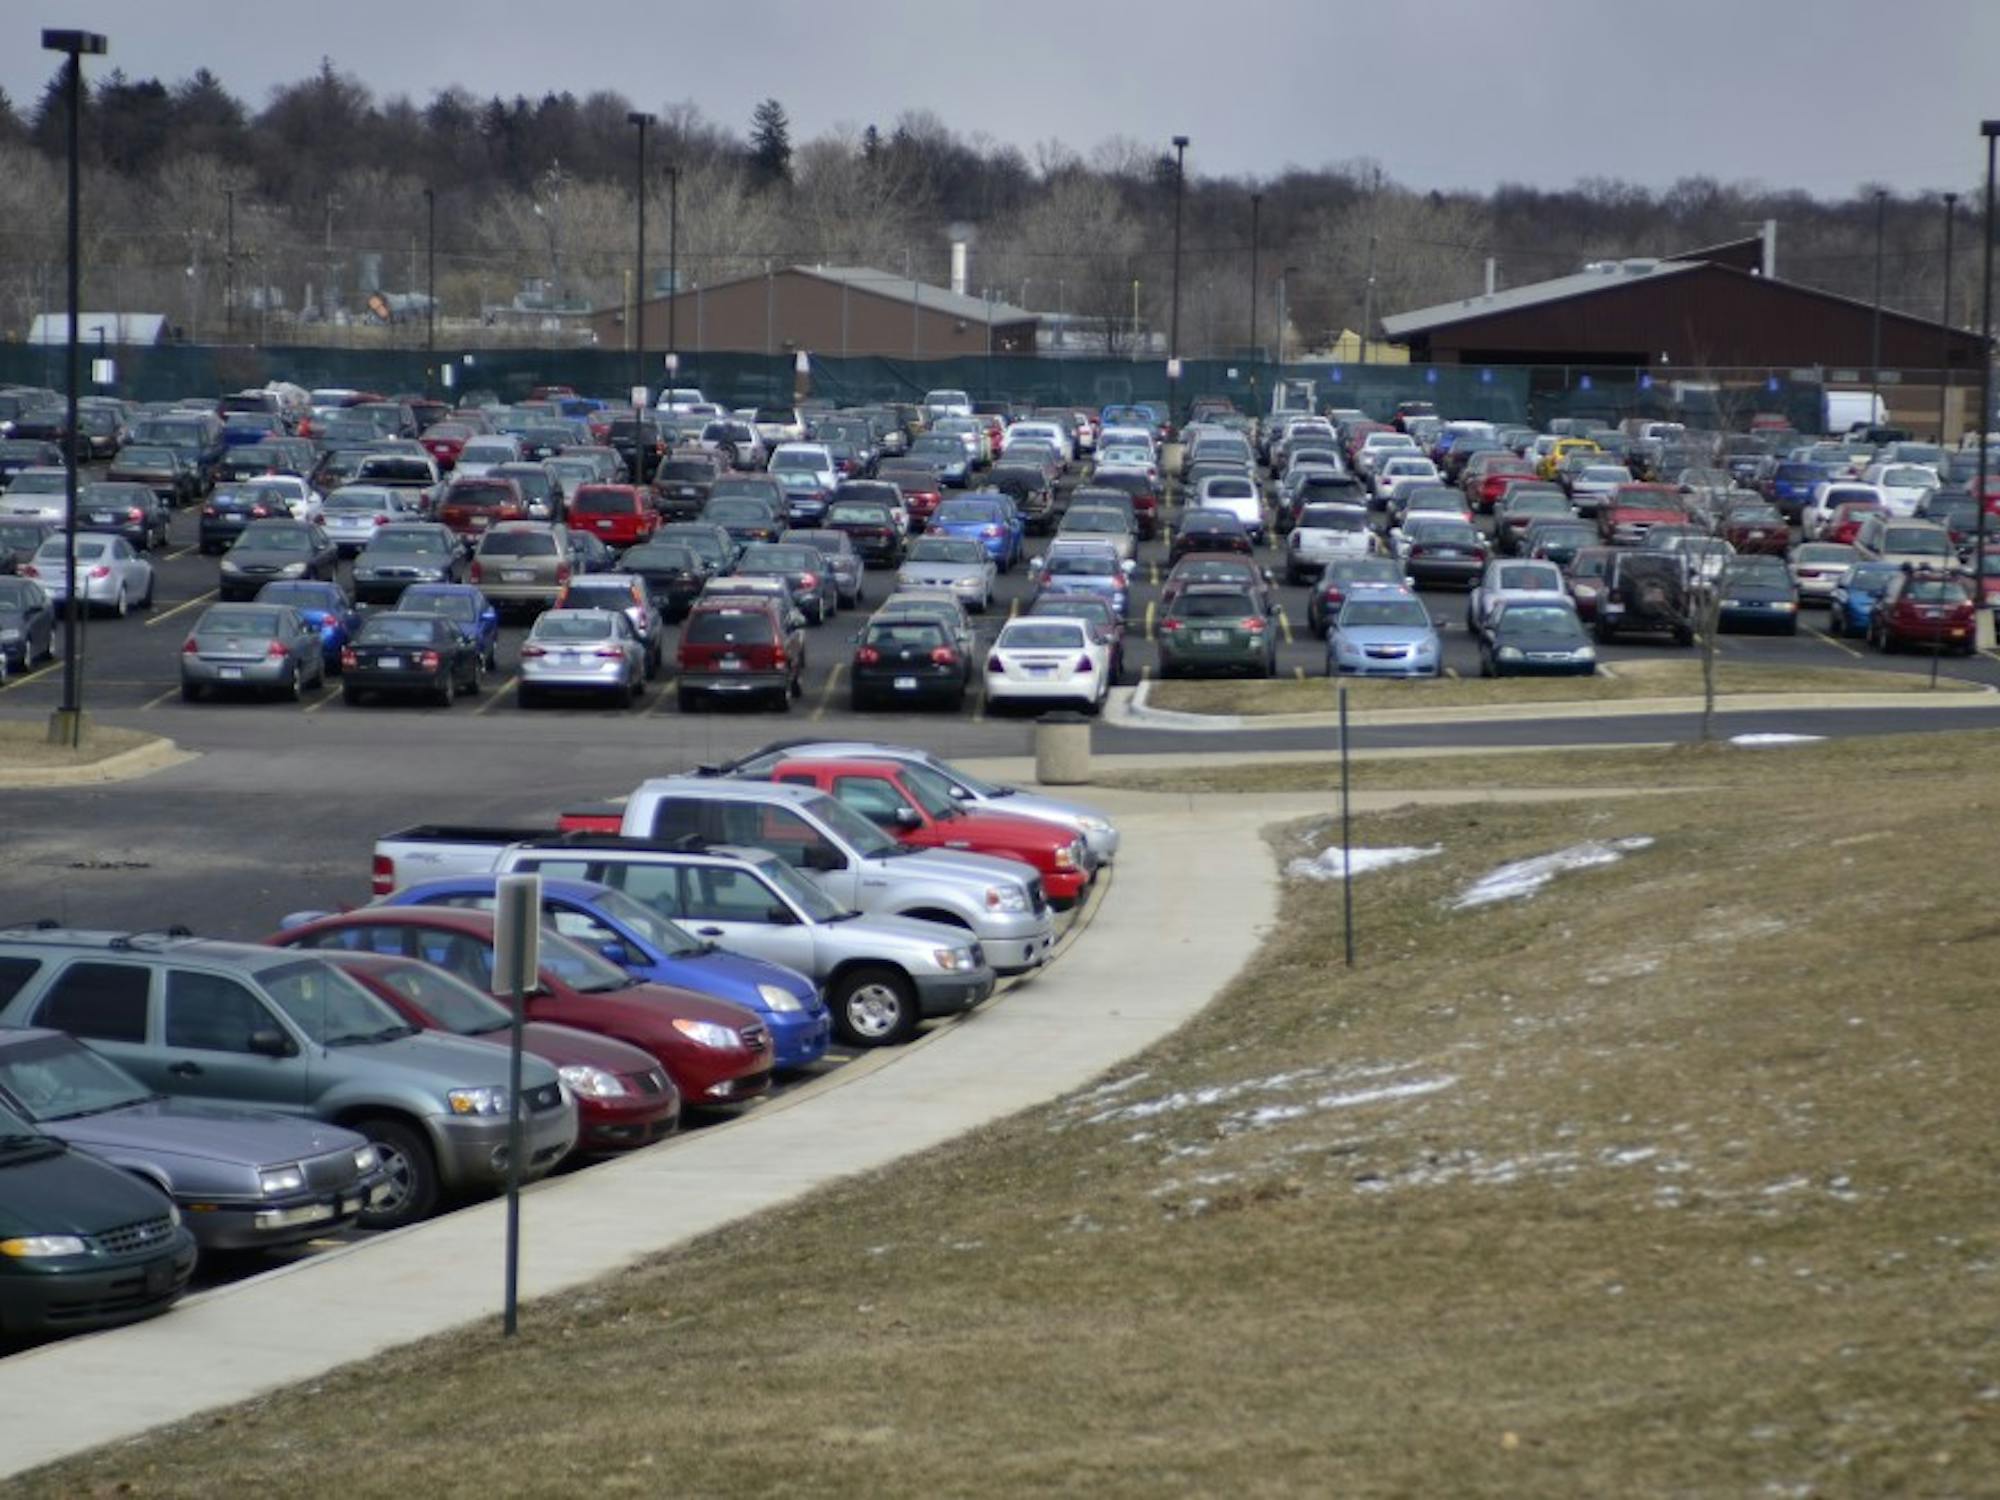 	Many EMU students who commute to campus are irritated with the lack of close spots and the potholes in some lots.